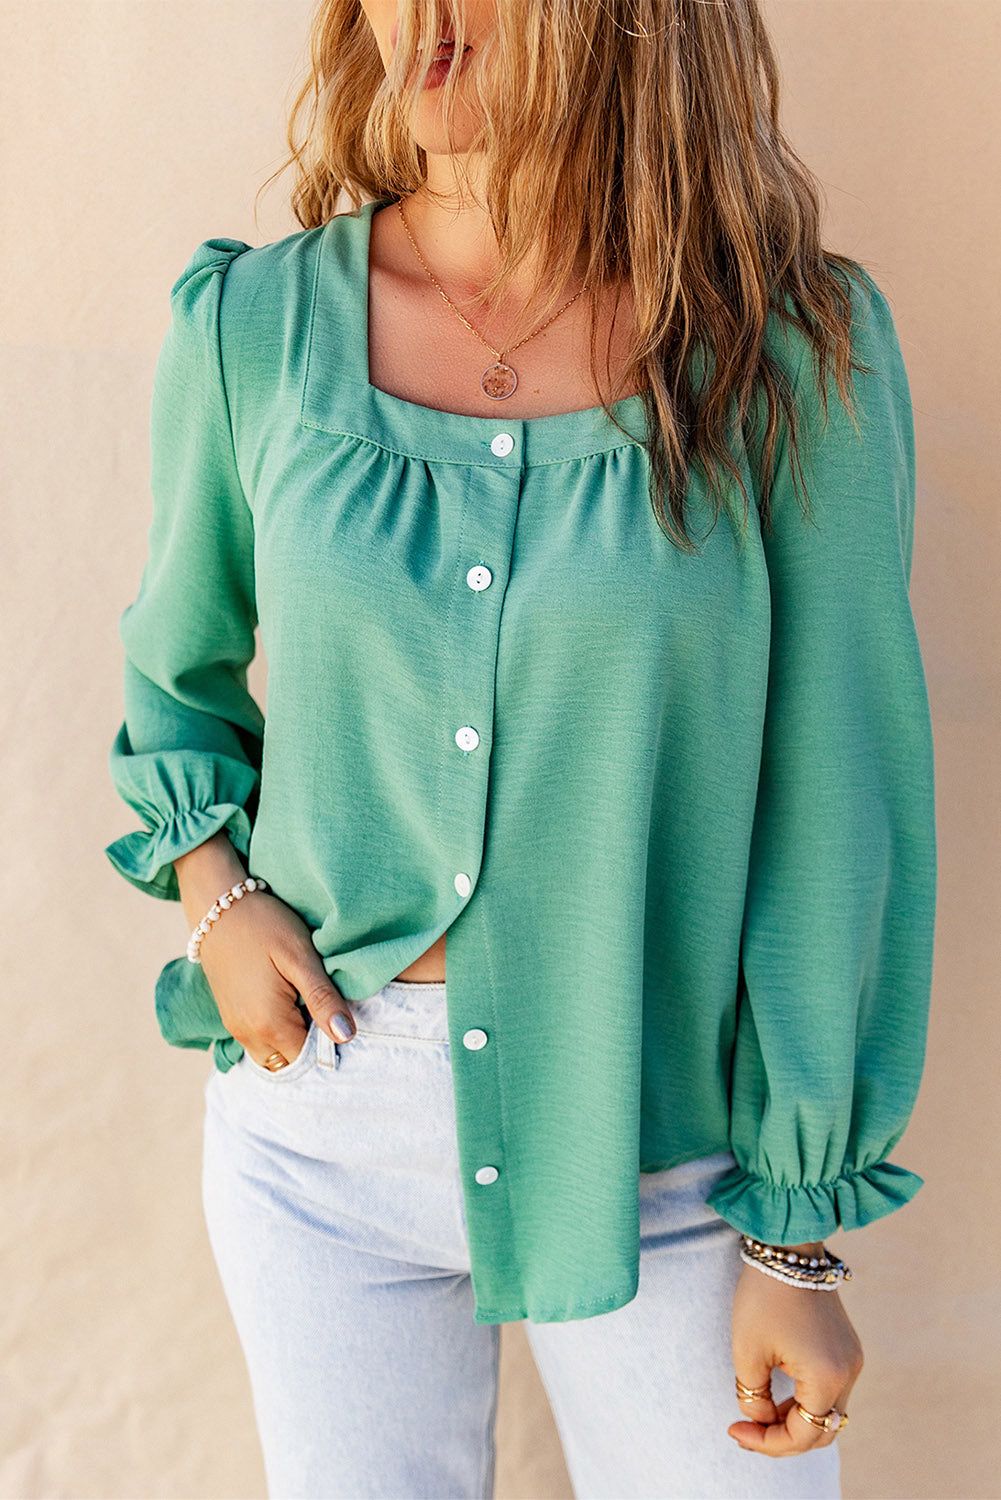 Square Neck Flounce Sleeve Buttoned Shirt.